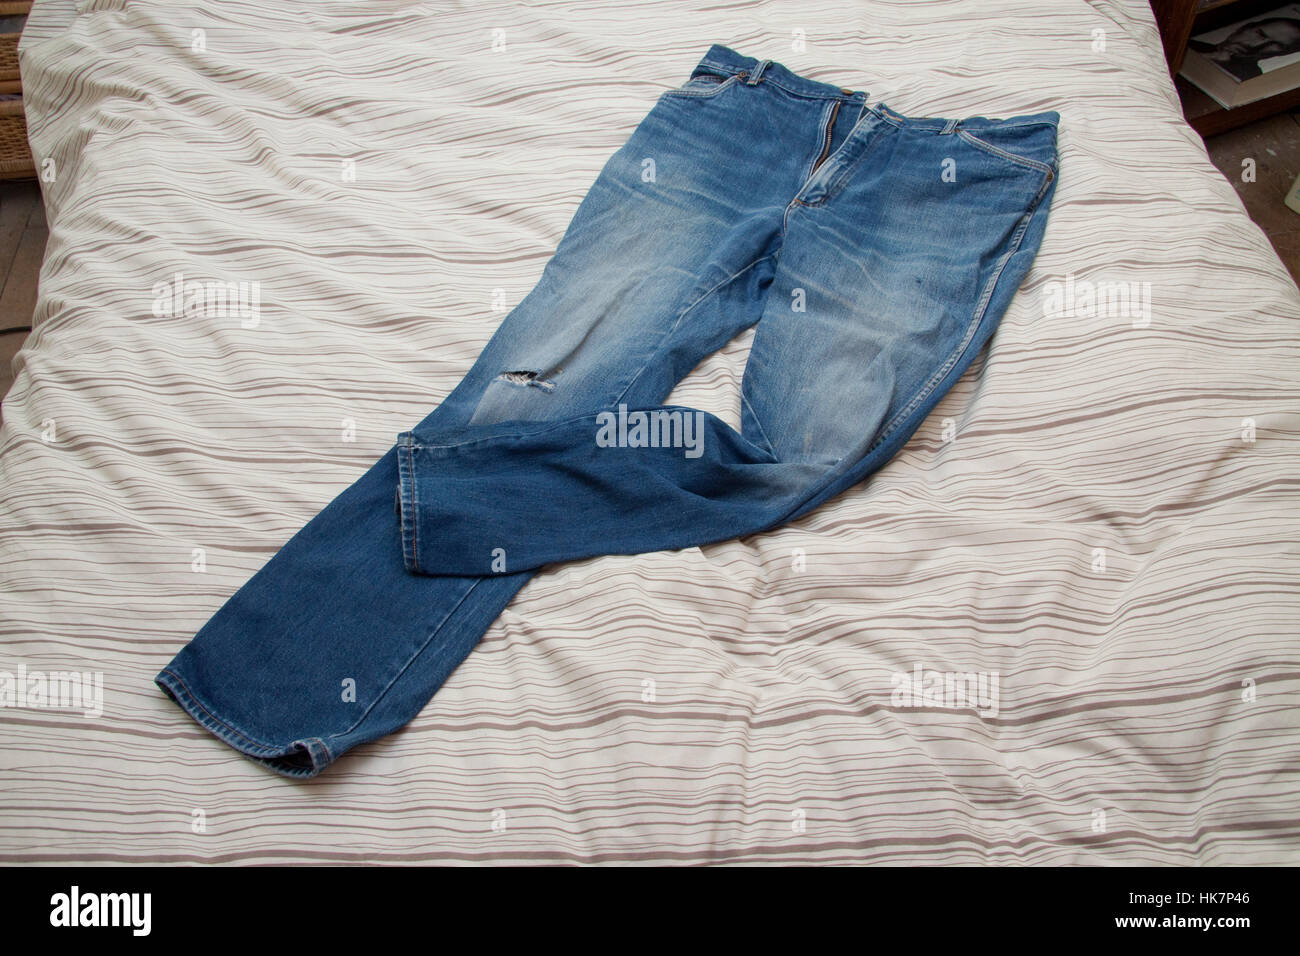 Worn blue jeans on a bed quilt Stock Photo